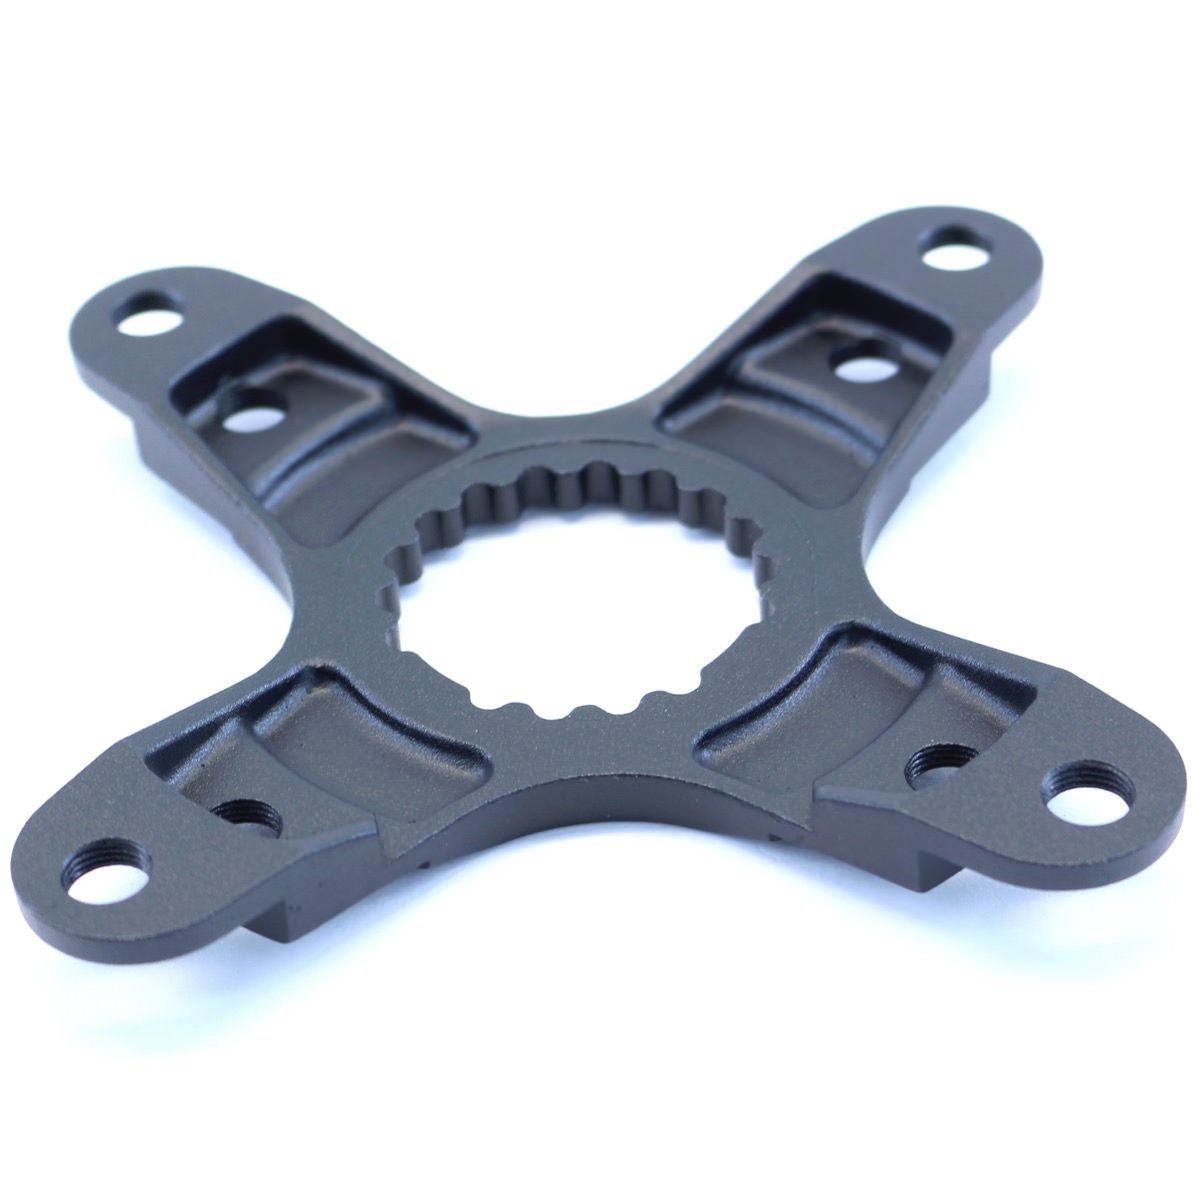 Crankset Spider Tab Cover - The LBS